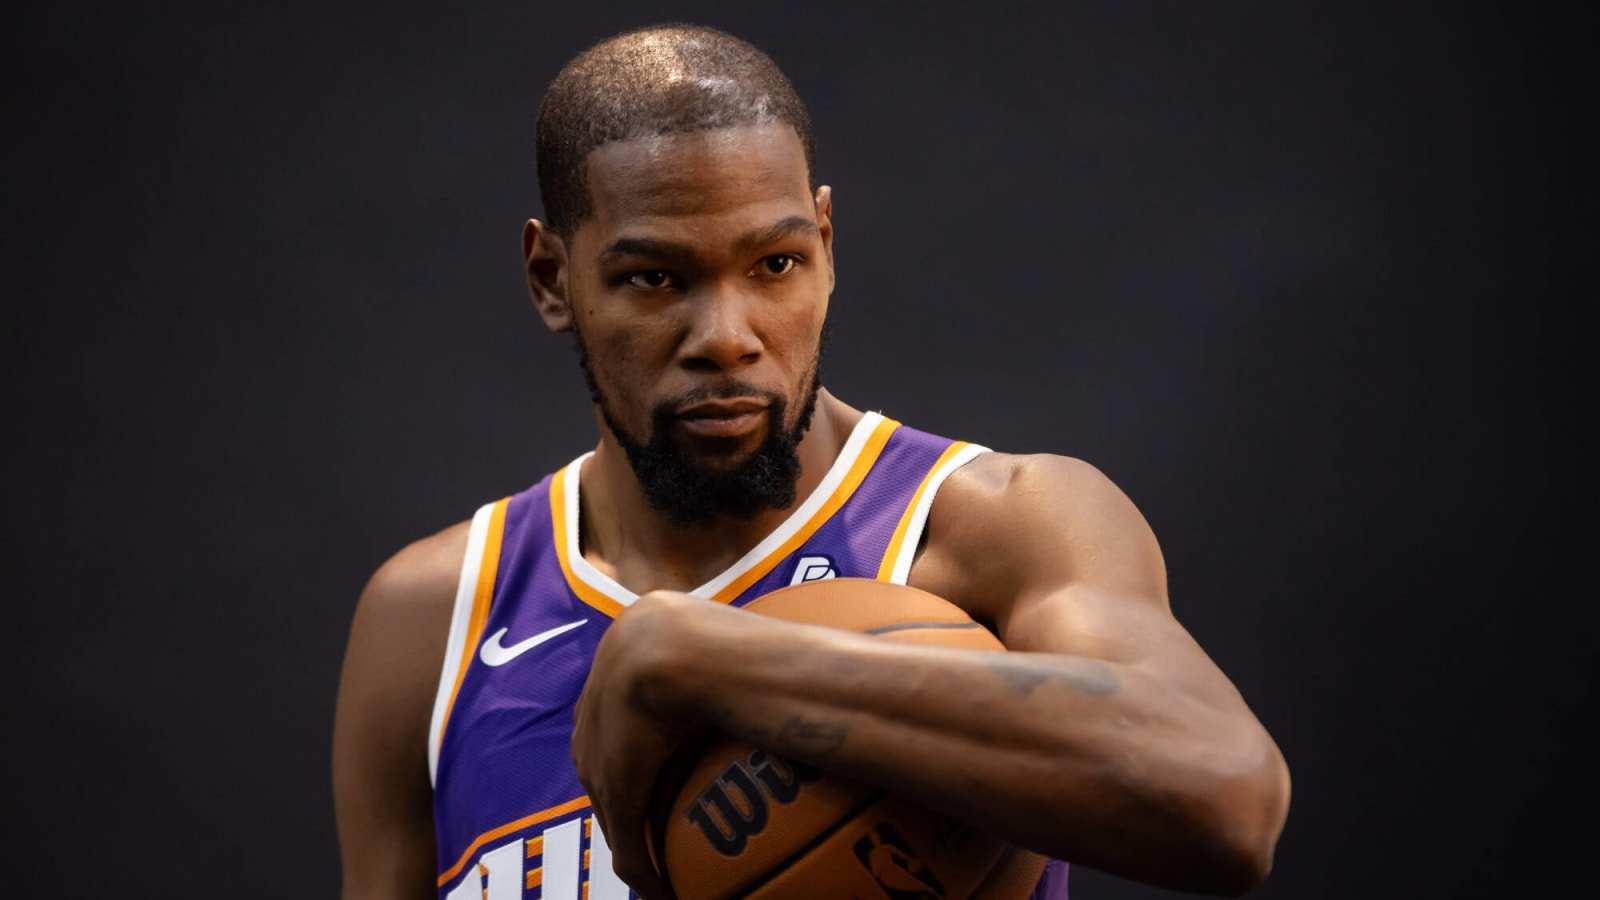 Suns’ Kevin Durant Gets Honest On His NBA Career: ‘This Is What I Wanted To Be’